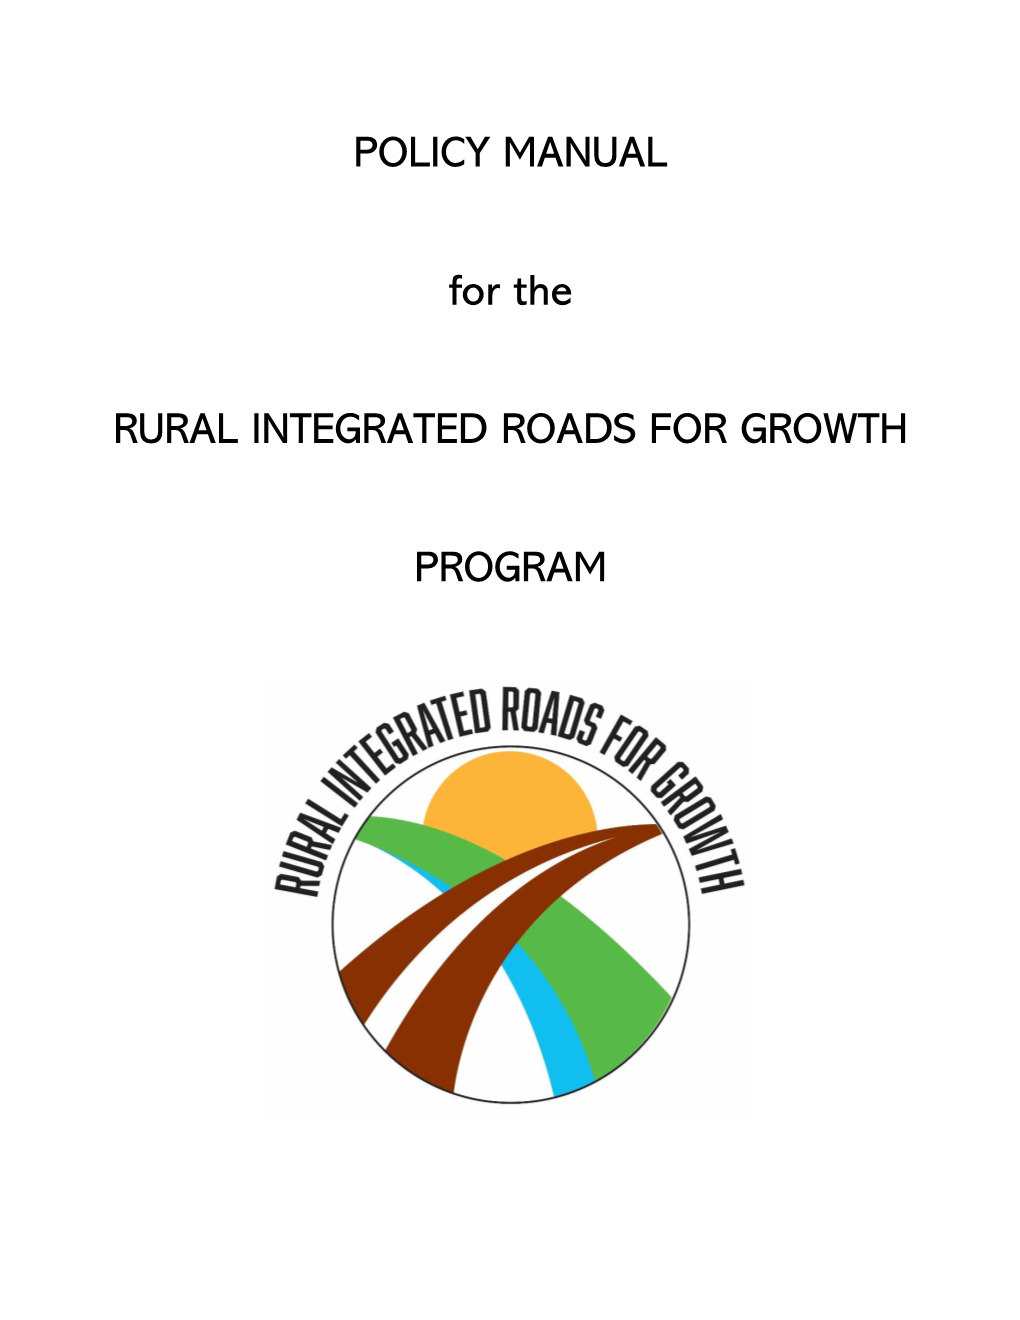 POLICY MANUAL for the RURAL INTEGRATED ROADS for GROWTH PROGRAM